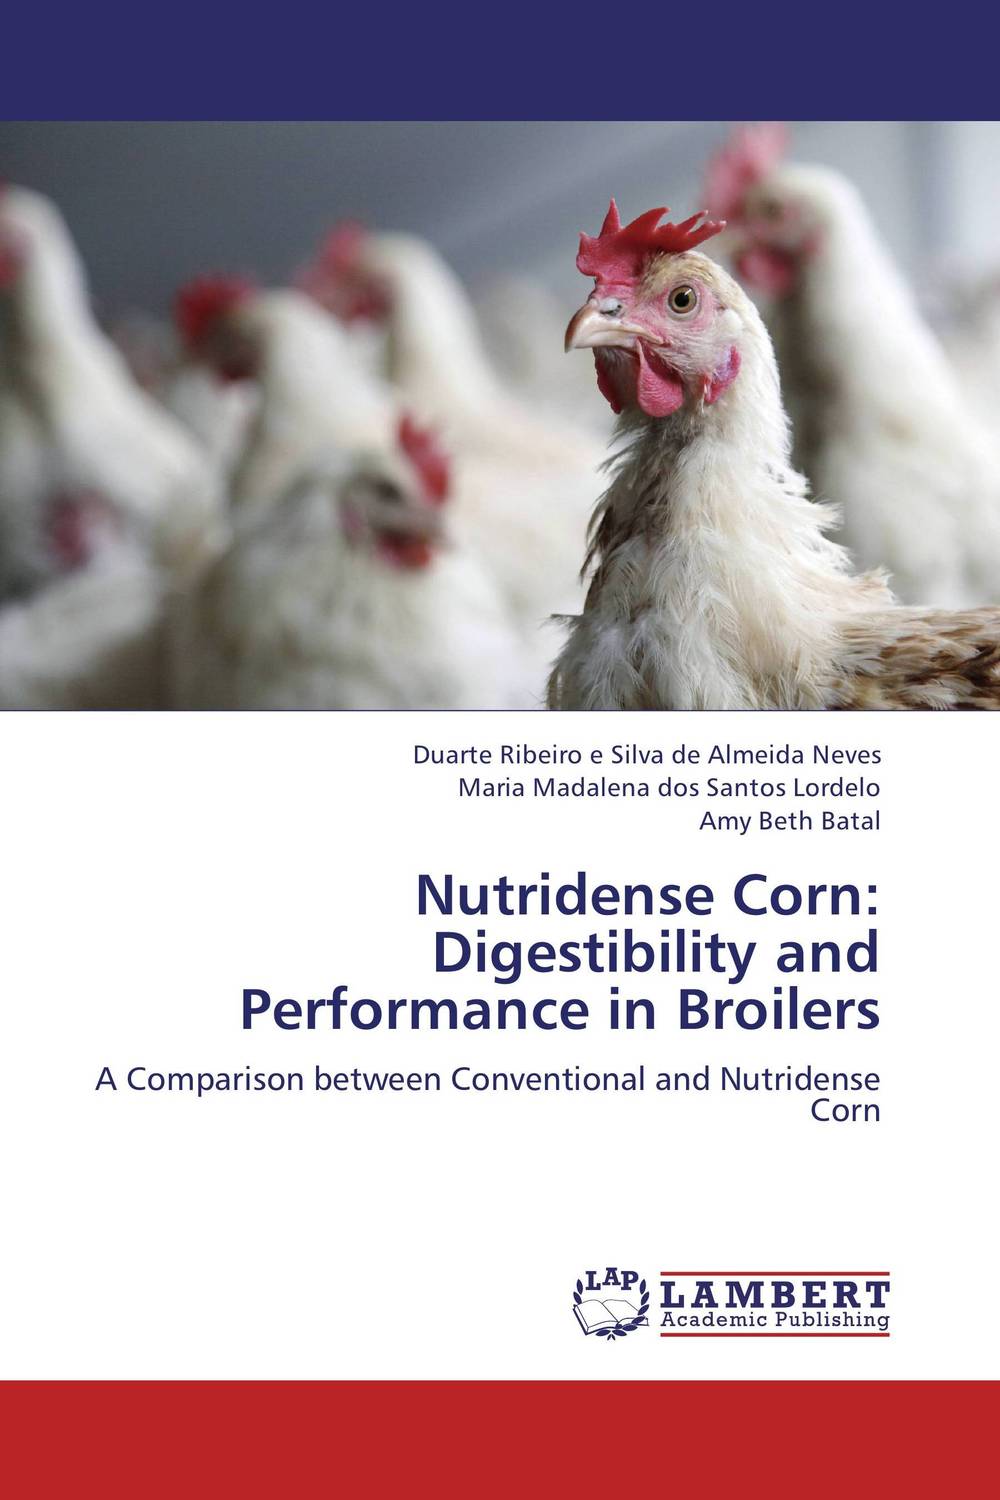 Nutridense Corn: Digestibility and Performance in Broilers